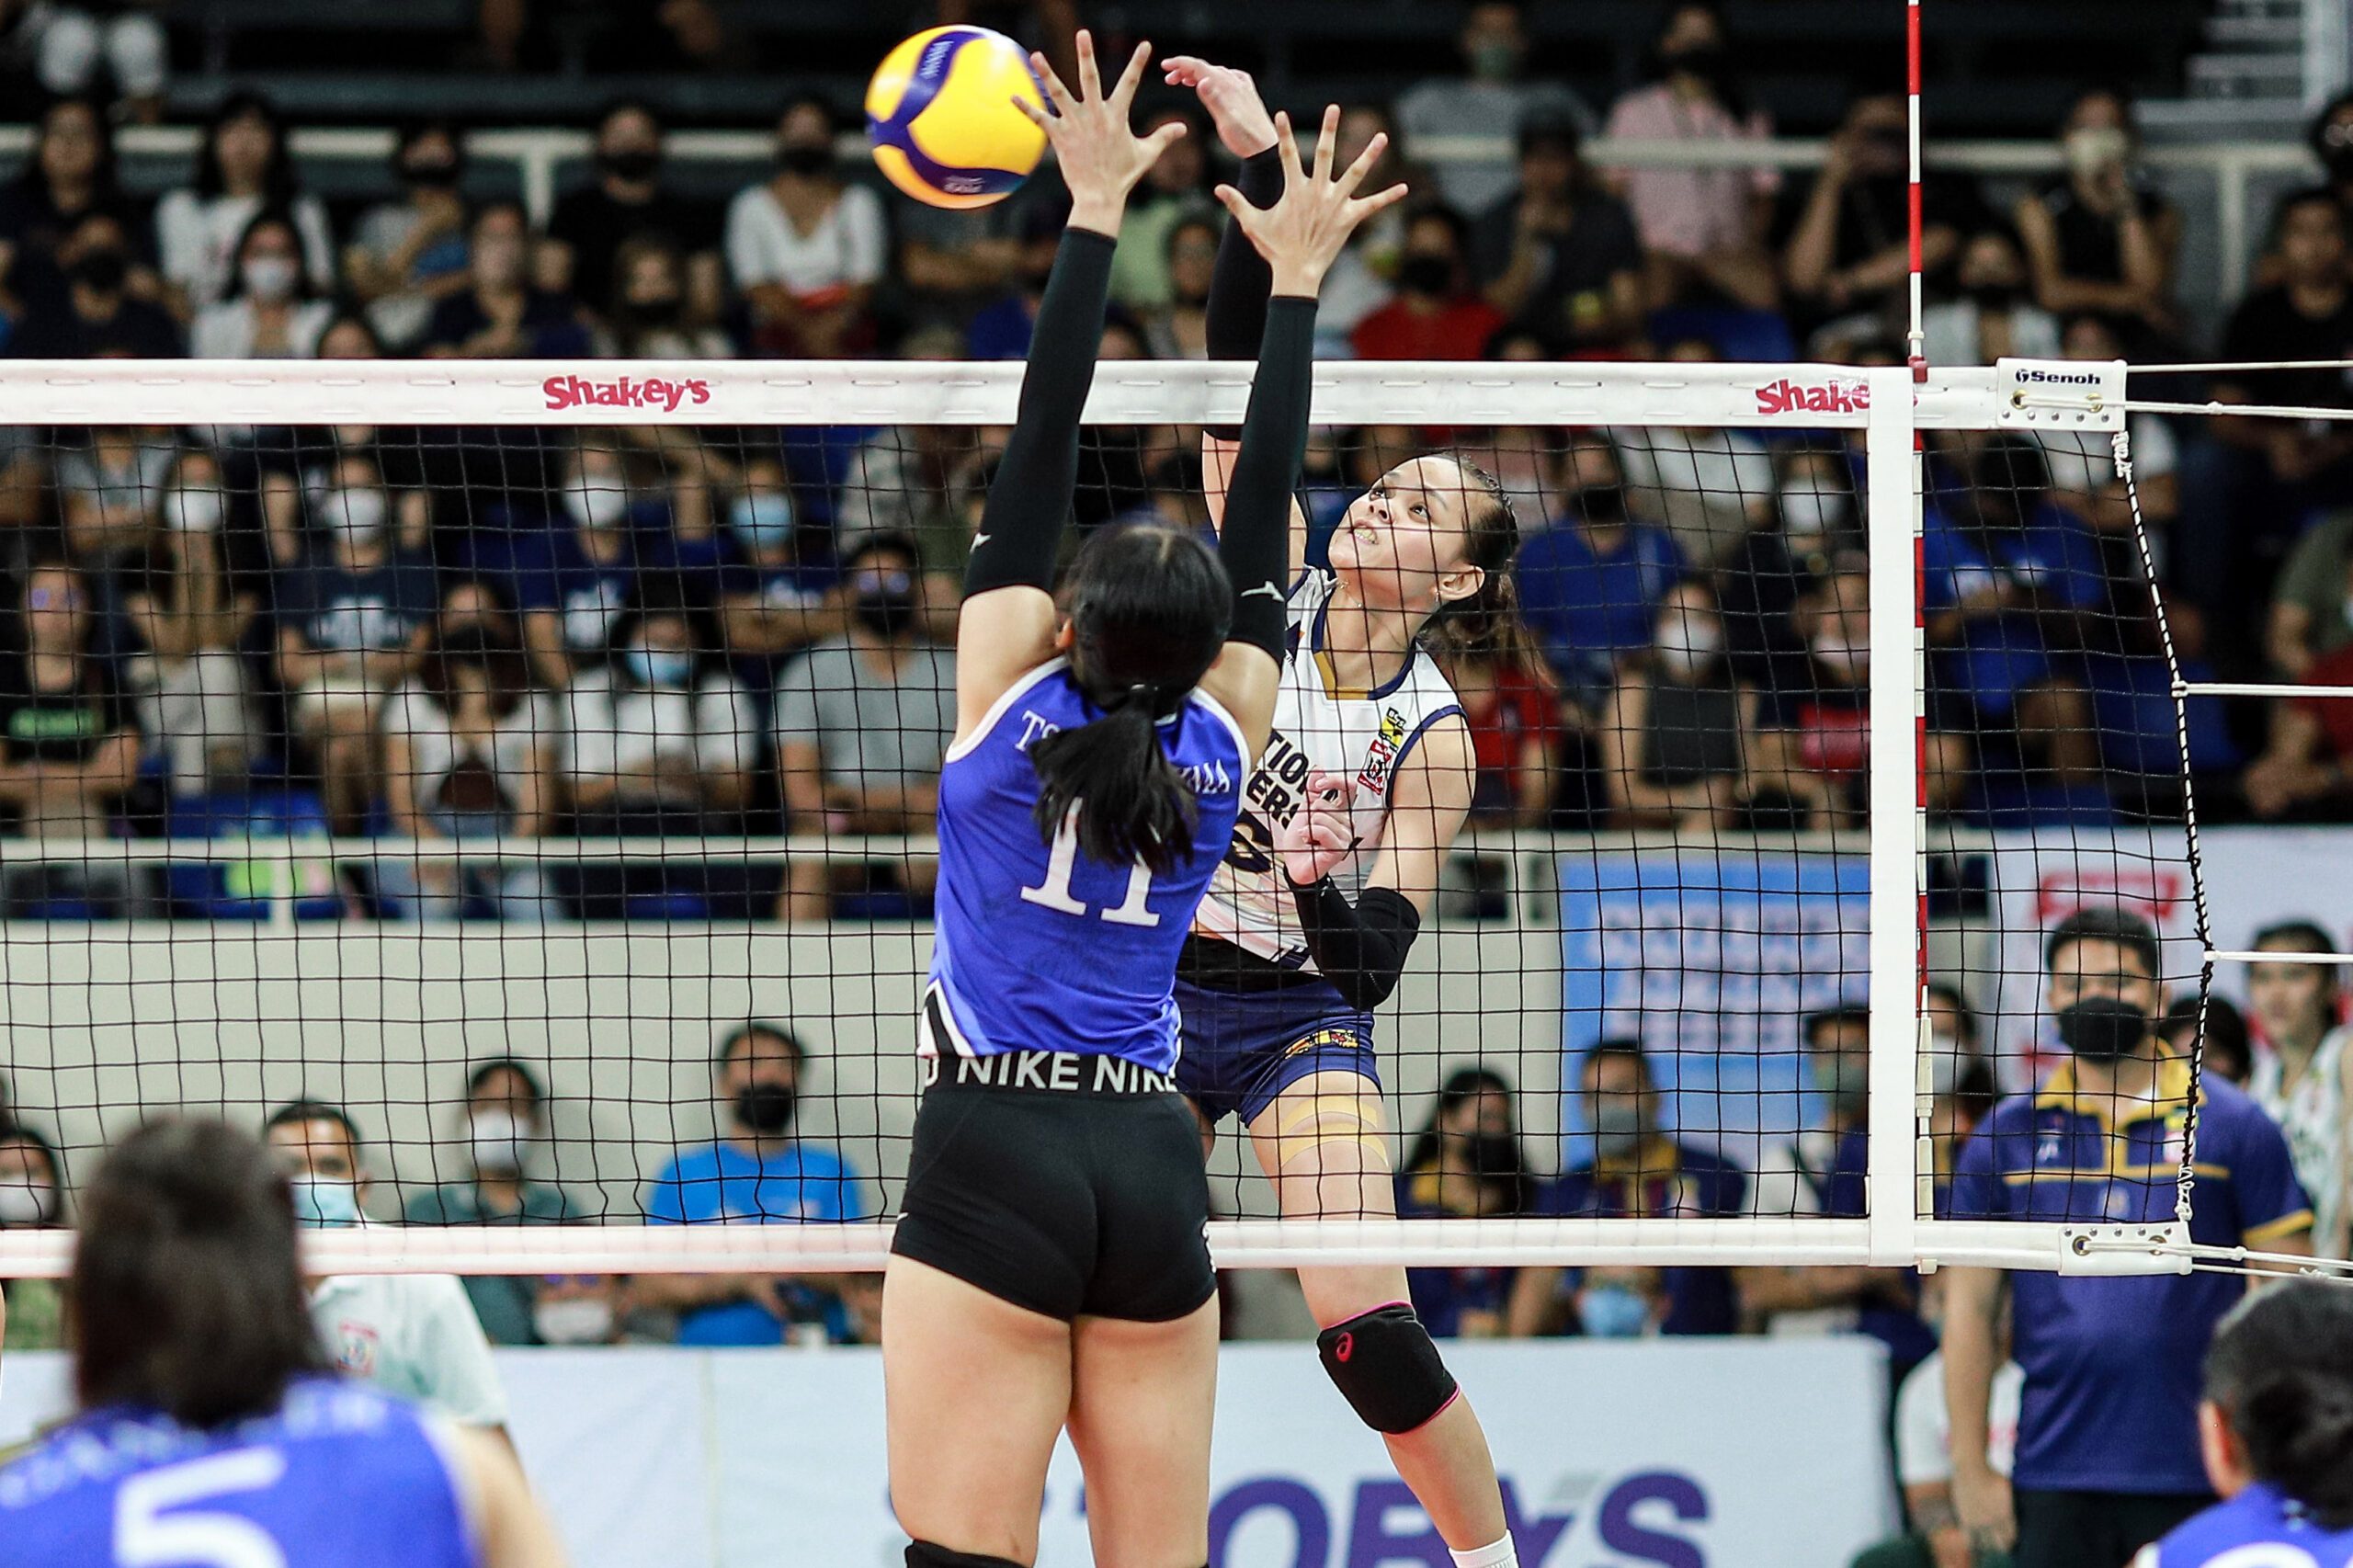 NU outlasts Ateneo, marches to next Super League round